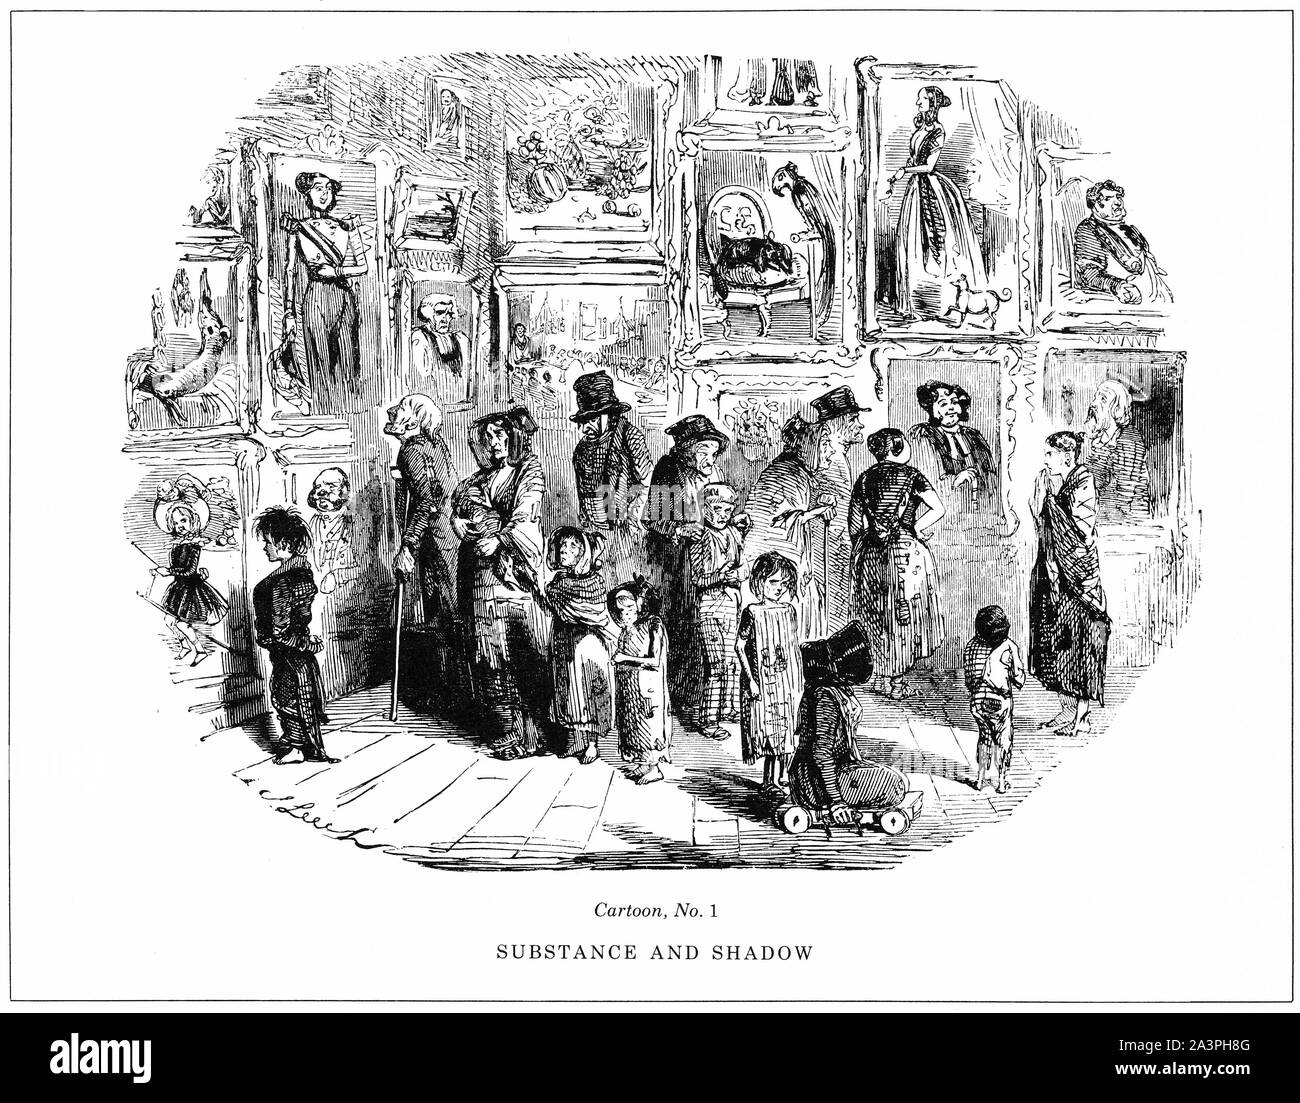 Engraving of England's poor surveying the paintings of a rich household, showing the difference in English society. From Punch magazine. Stock Photo